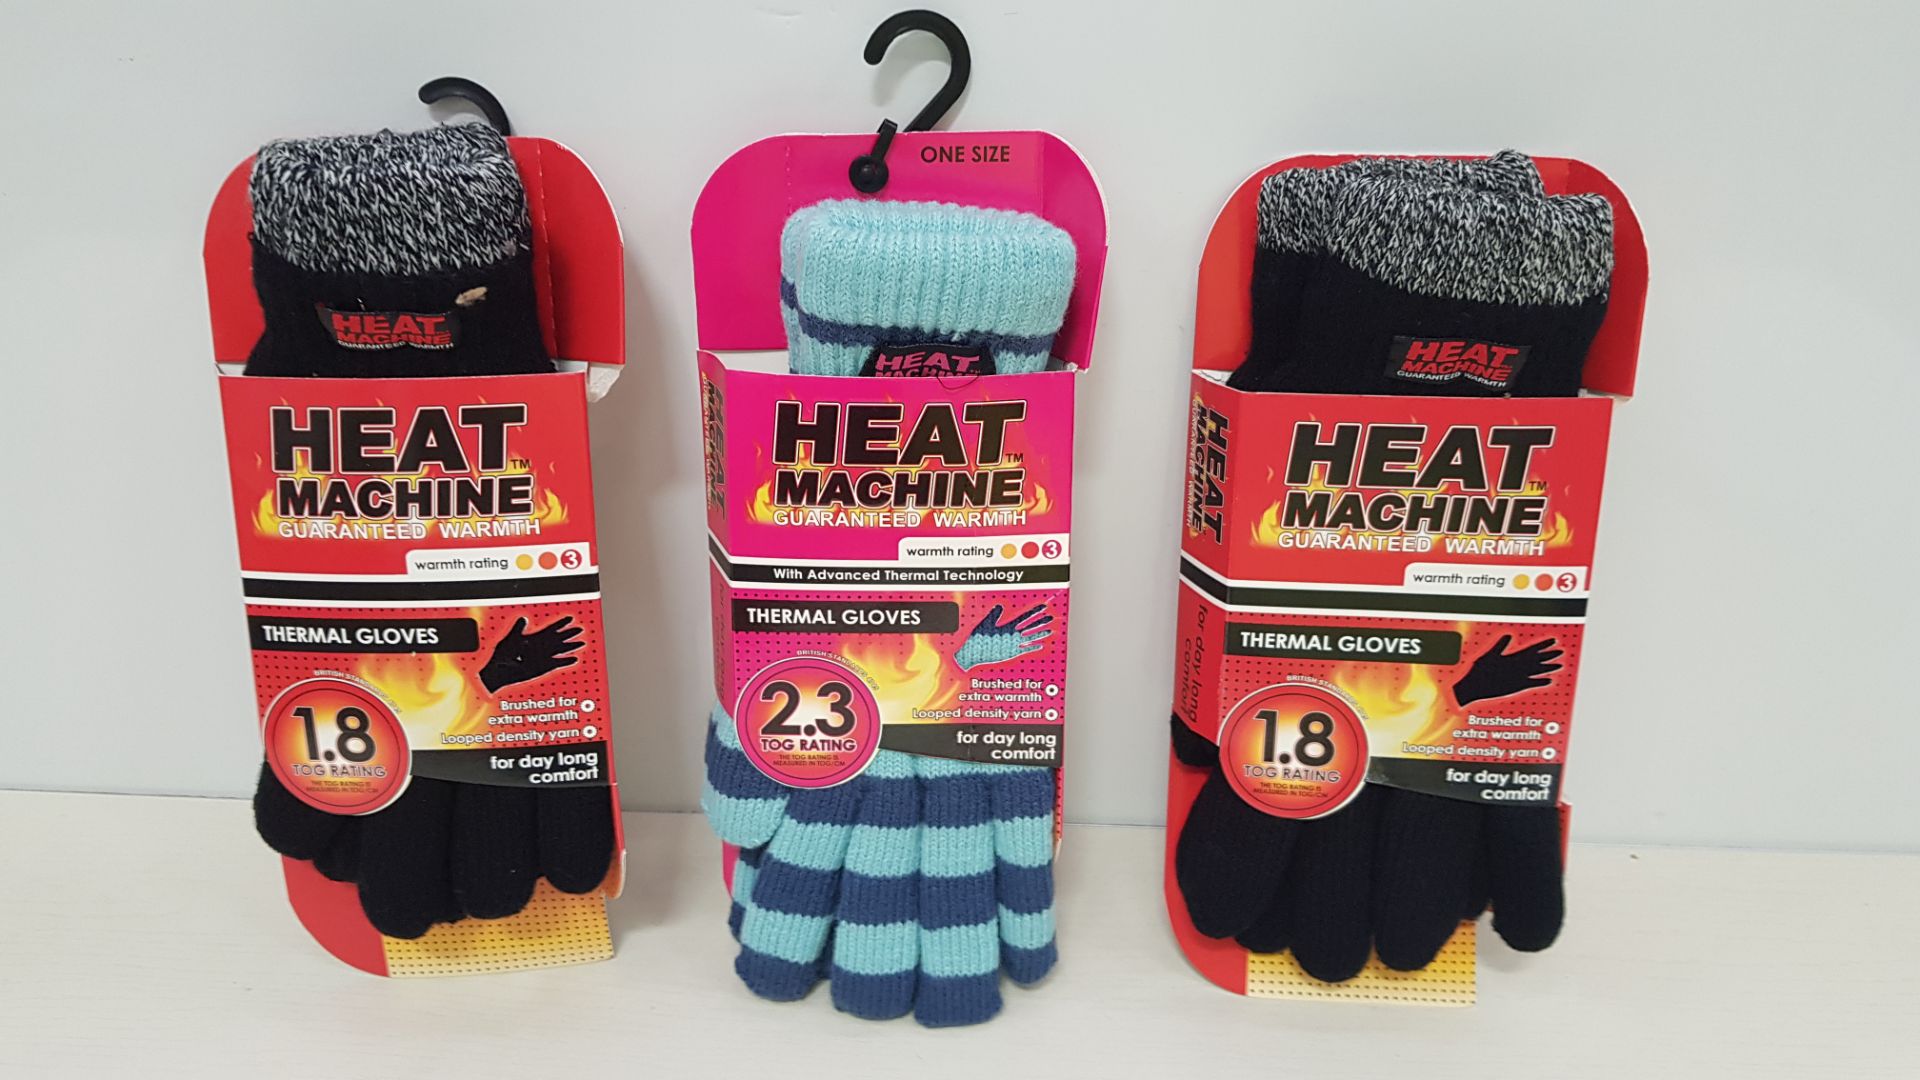 34 PIECE MIXED CLOTHING LOT CONTAINING HEAT MACHINE THERMAL GLOVES IN VARIOUS STYLES AND SIZES